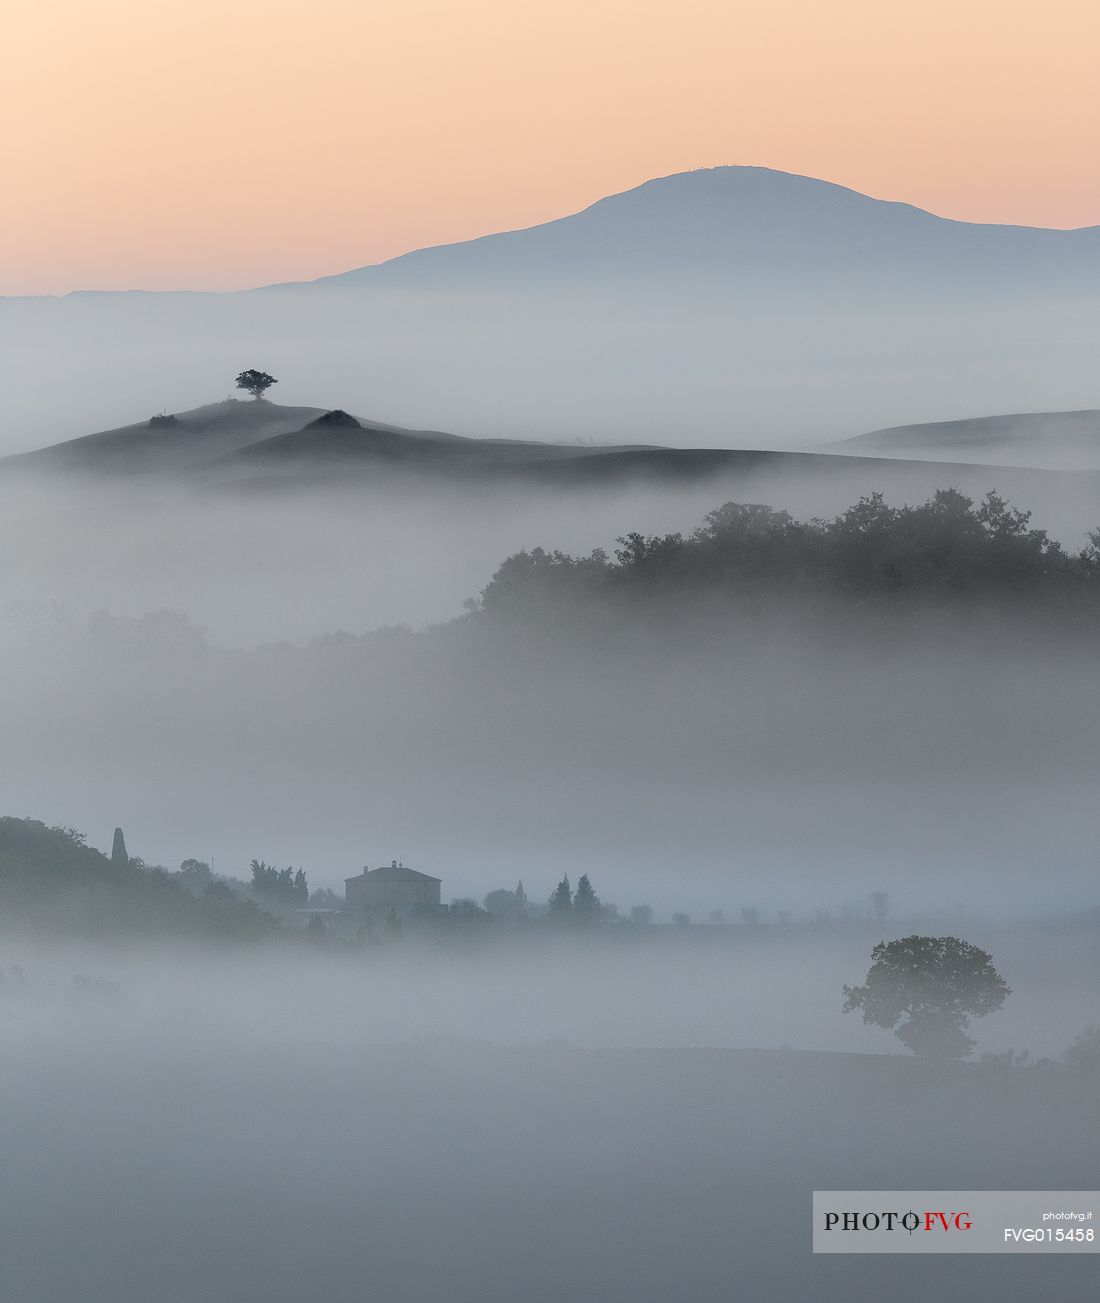 The fog of an autumn sunrise over the hills of Val D'Orcia